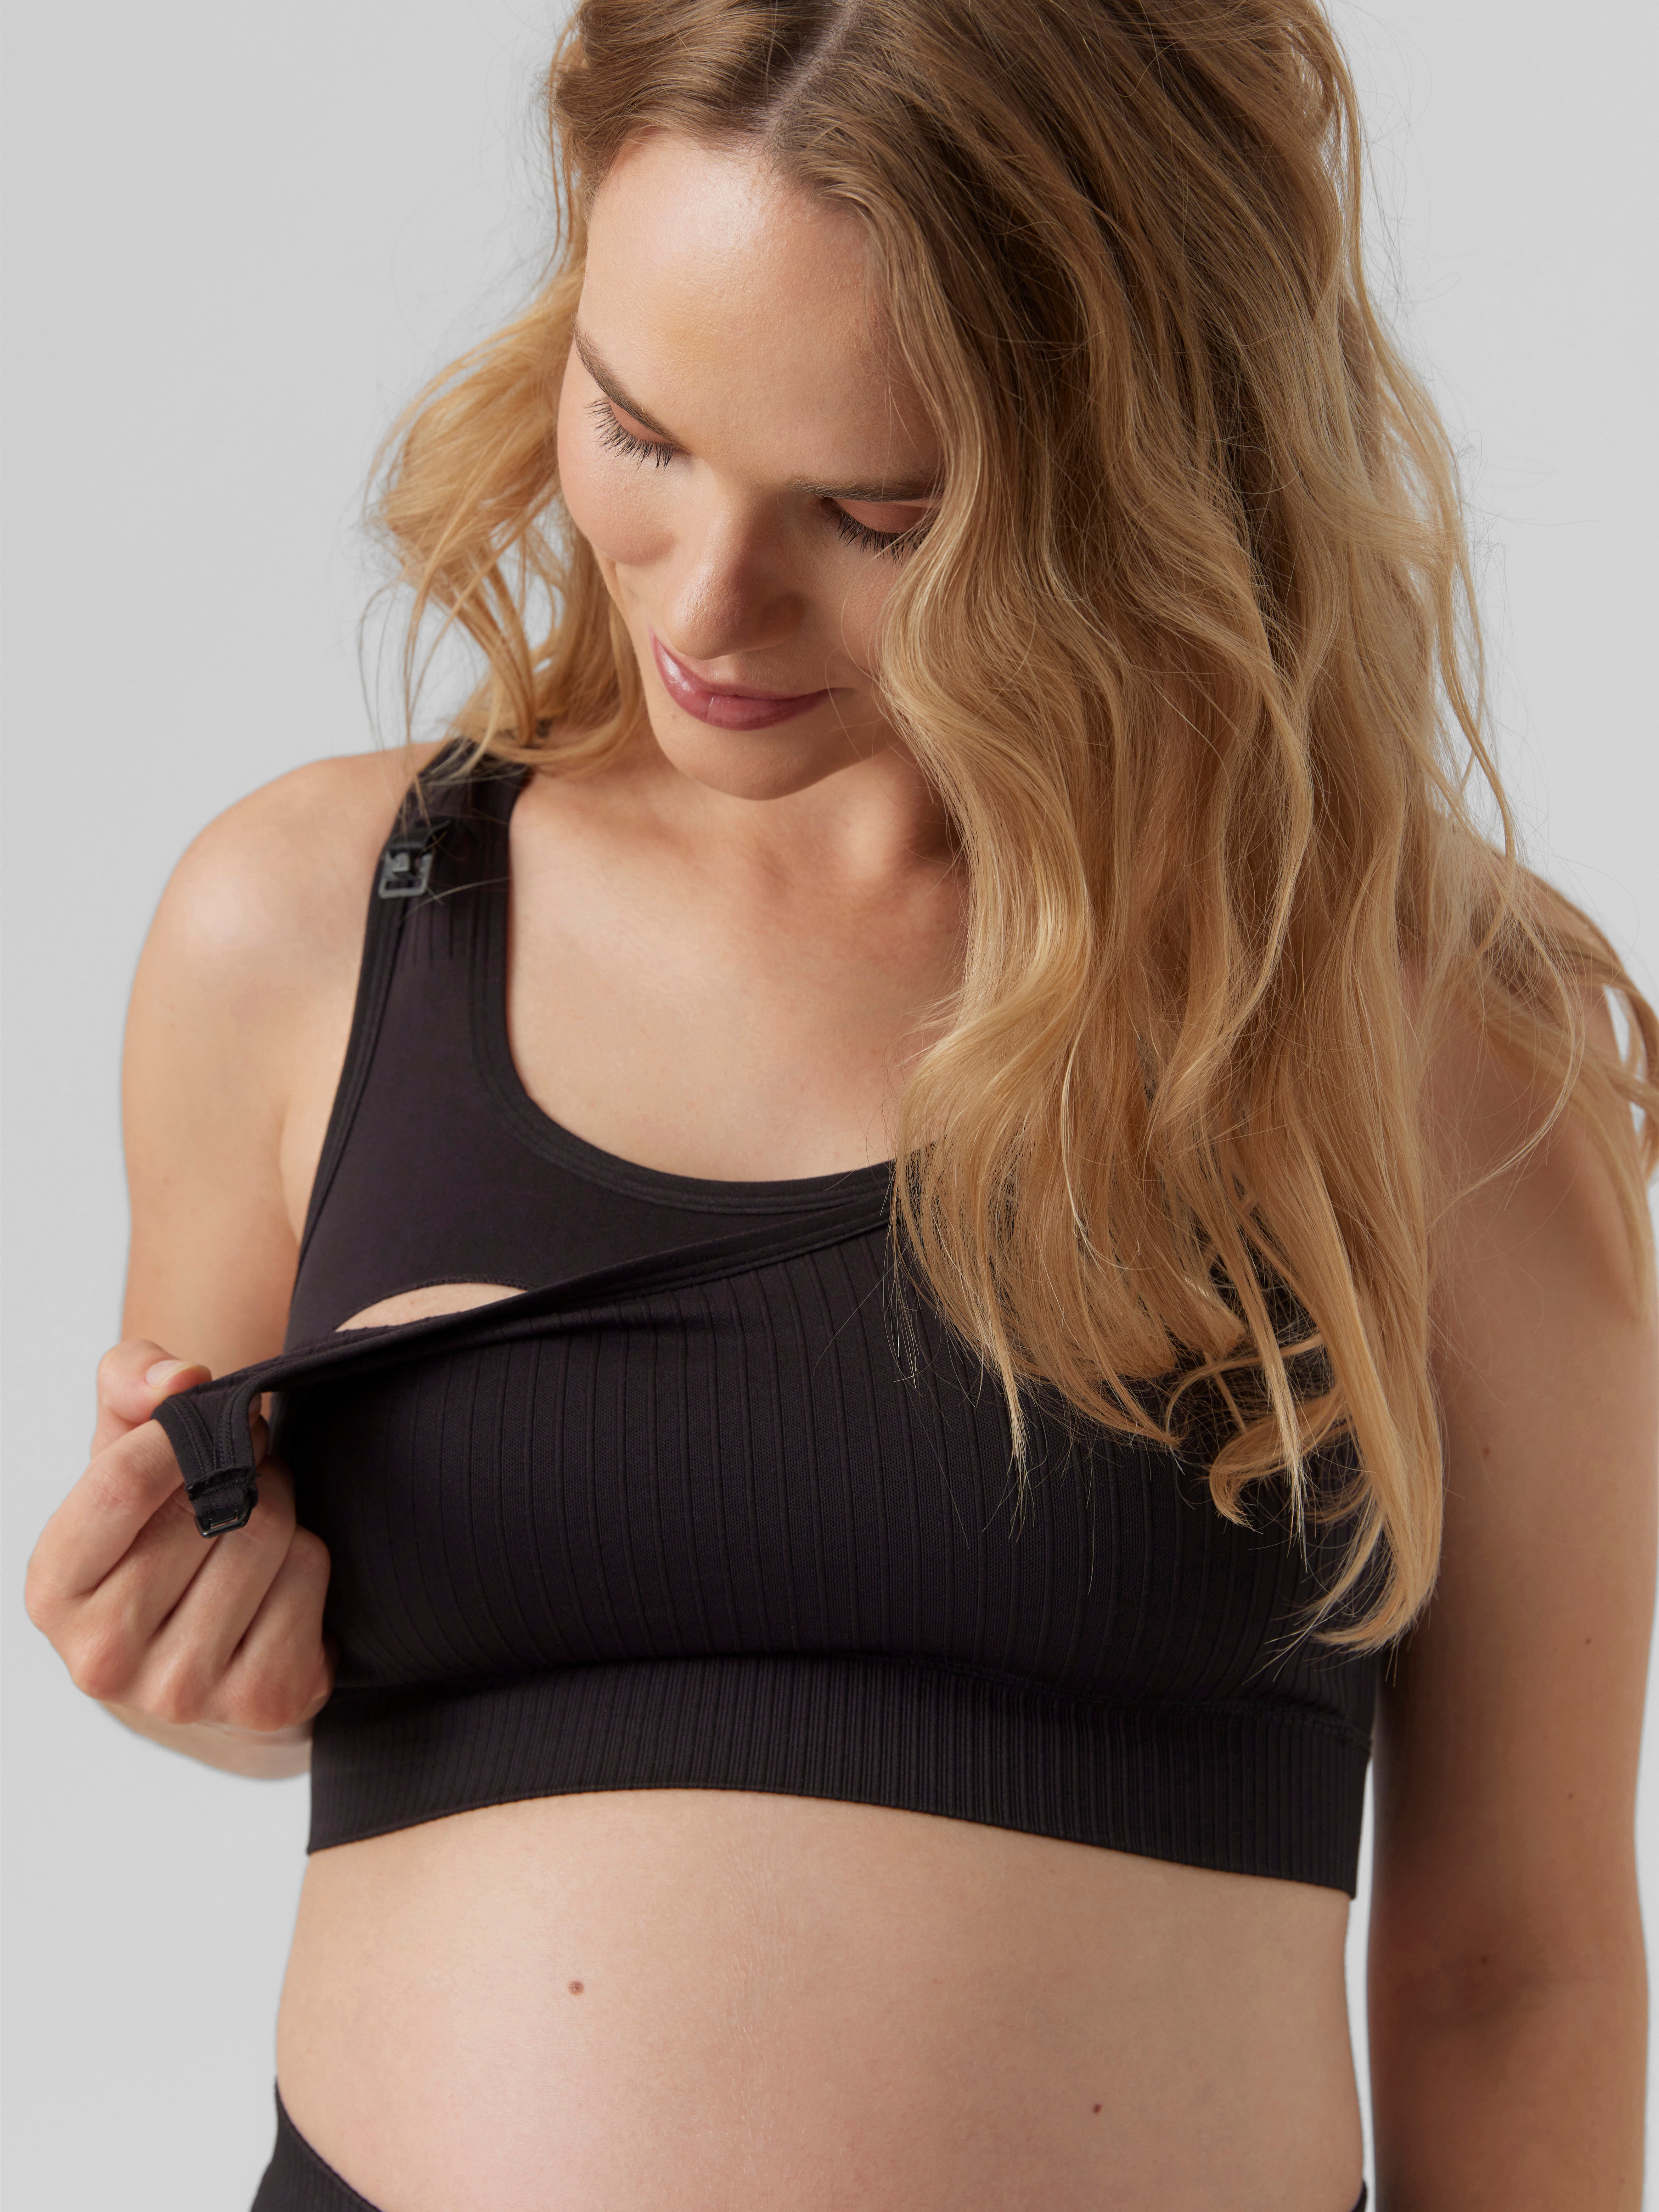 Licious-essentials - ANKO shock absorber sports bra, Available in